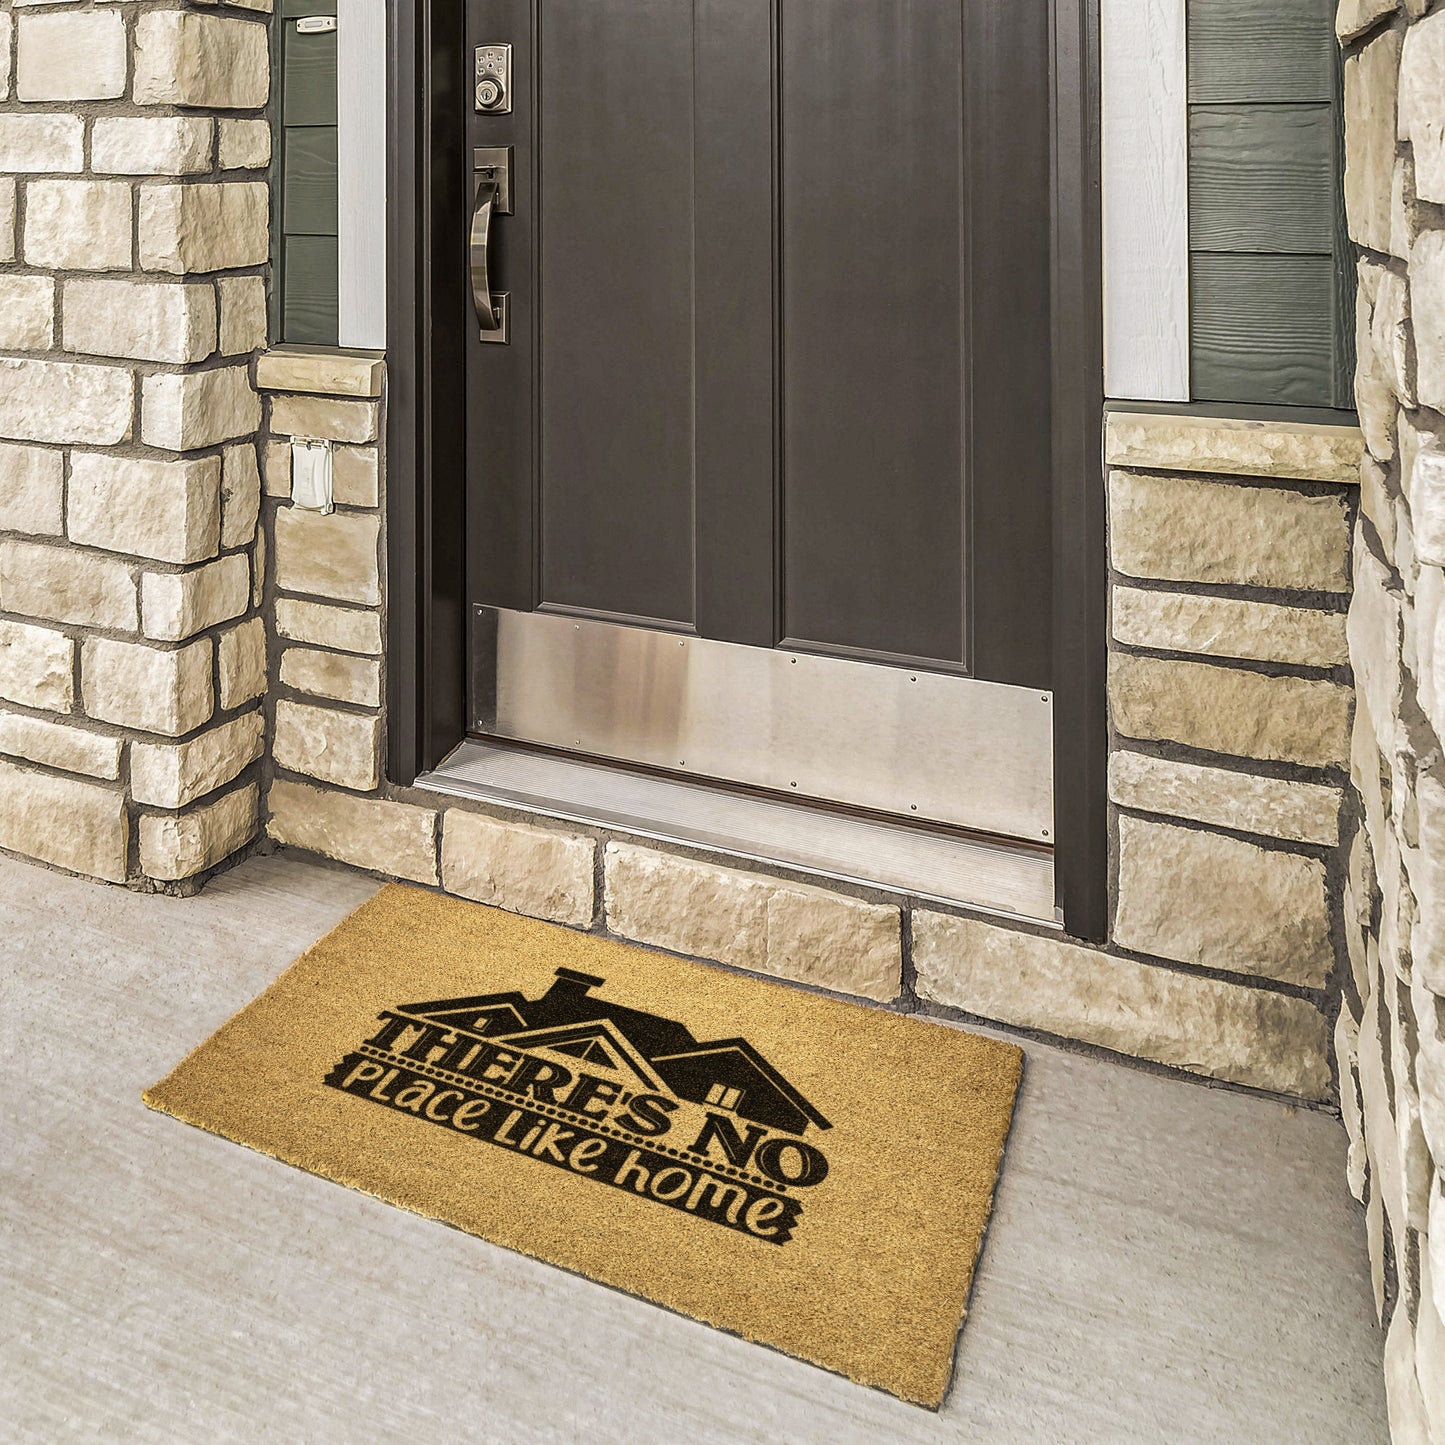 There's No Place Like Home, Mother's Day Gift, Welcome Door Mat, Home Doormat, Father's Day, Grandparents gift